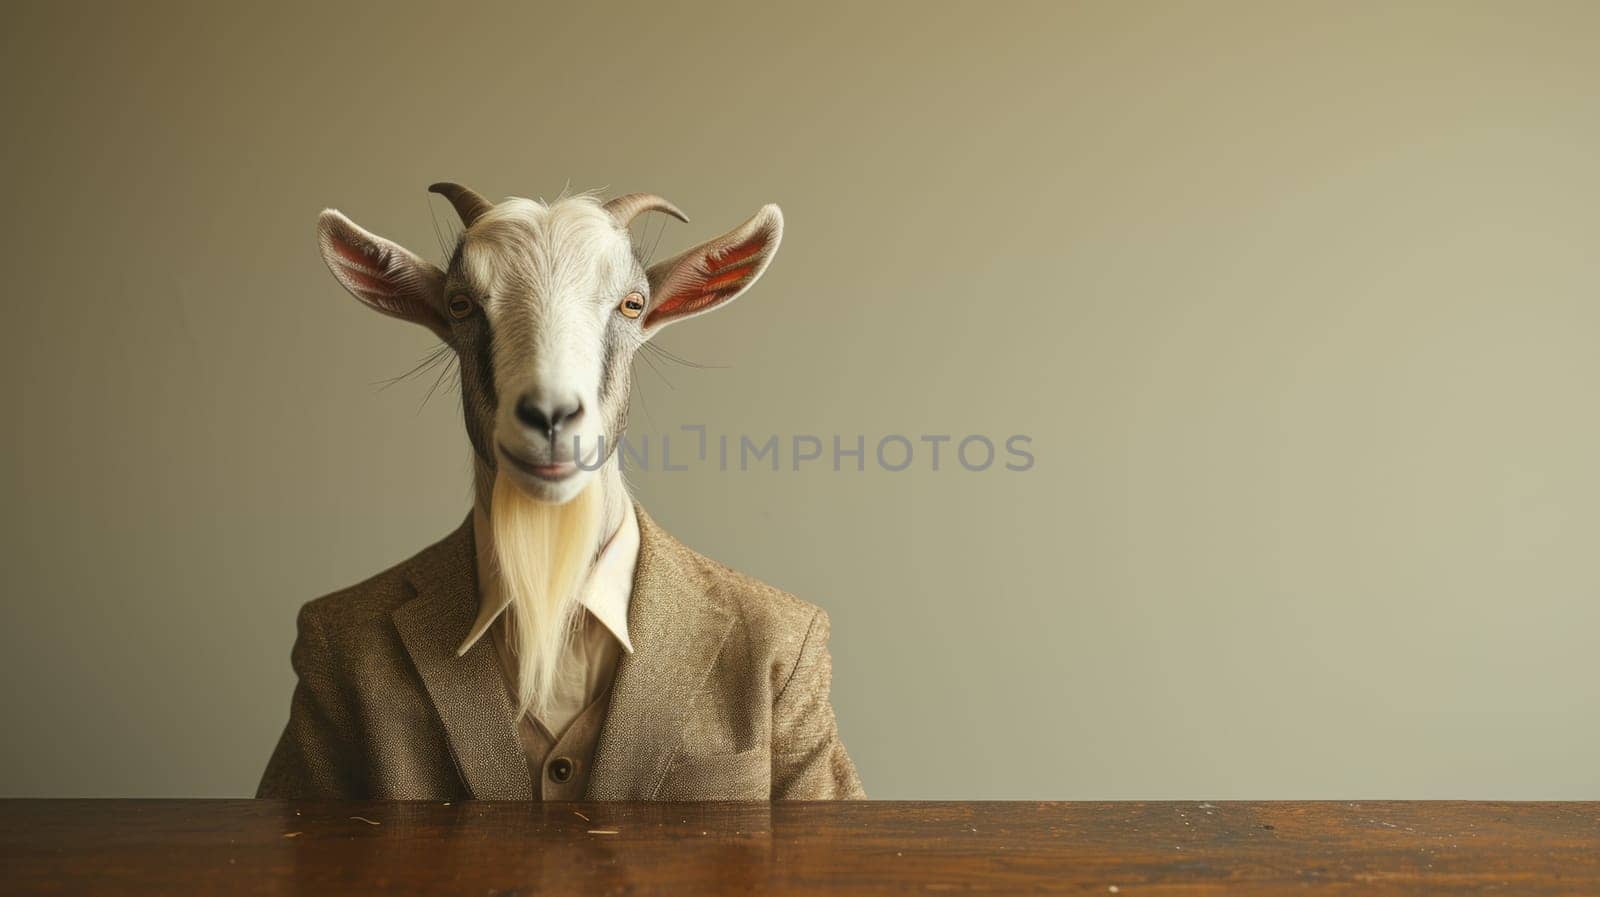 A goat wearing a suit and tie with long hair, AI by starush